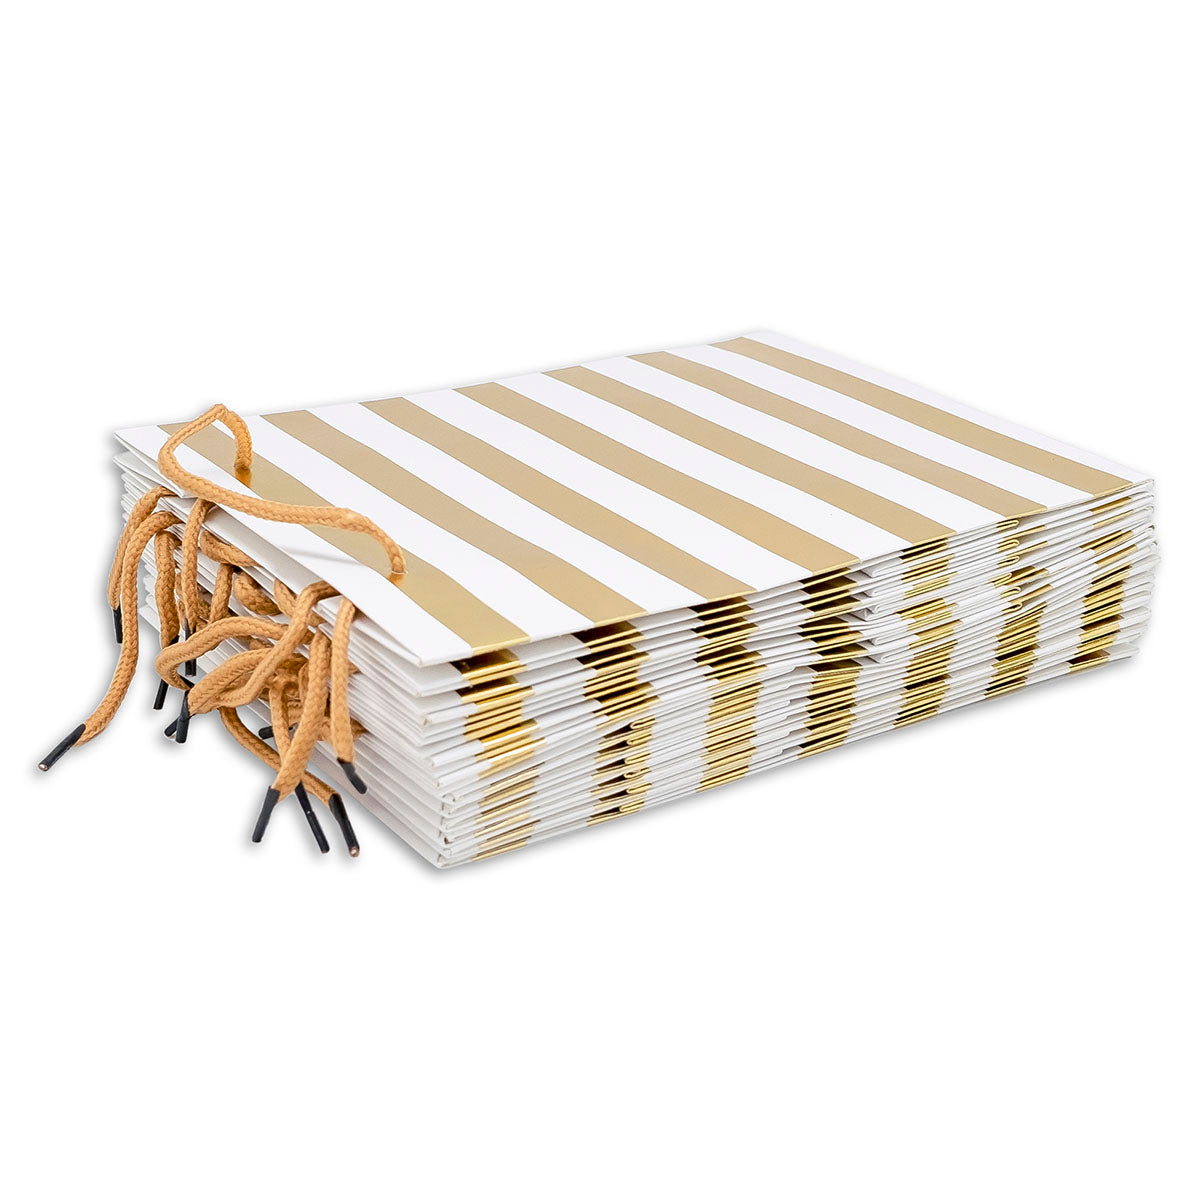 White and Gold Striped Gift Bags (12-Pack)